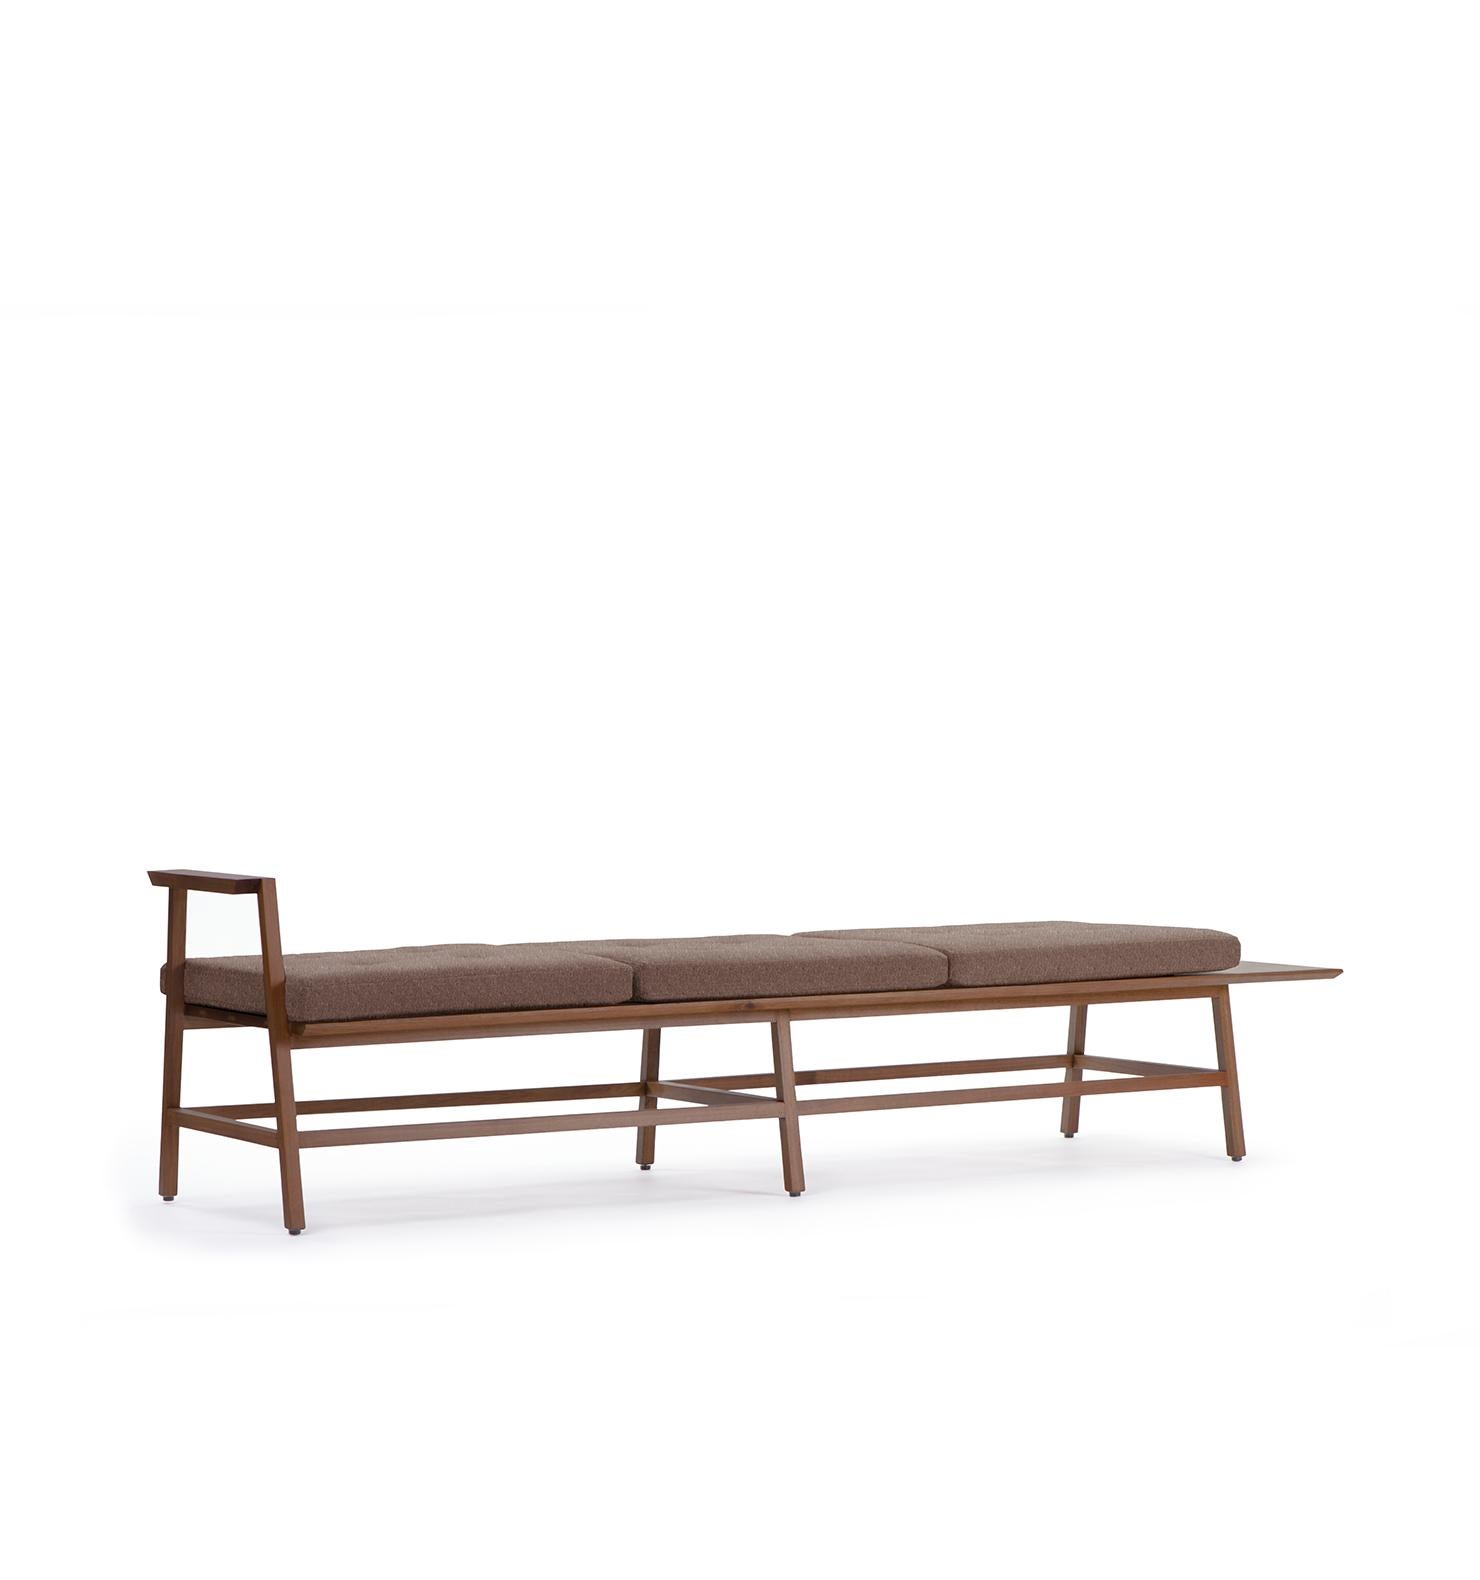 Banca Dedo, Mexican Contemporary 3-Seat Bench by Emiliano Molina for Cuchara For Sale 1